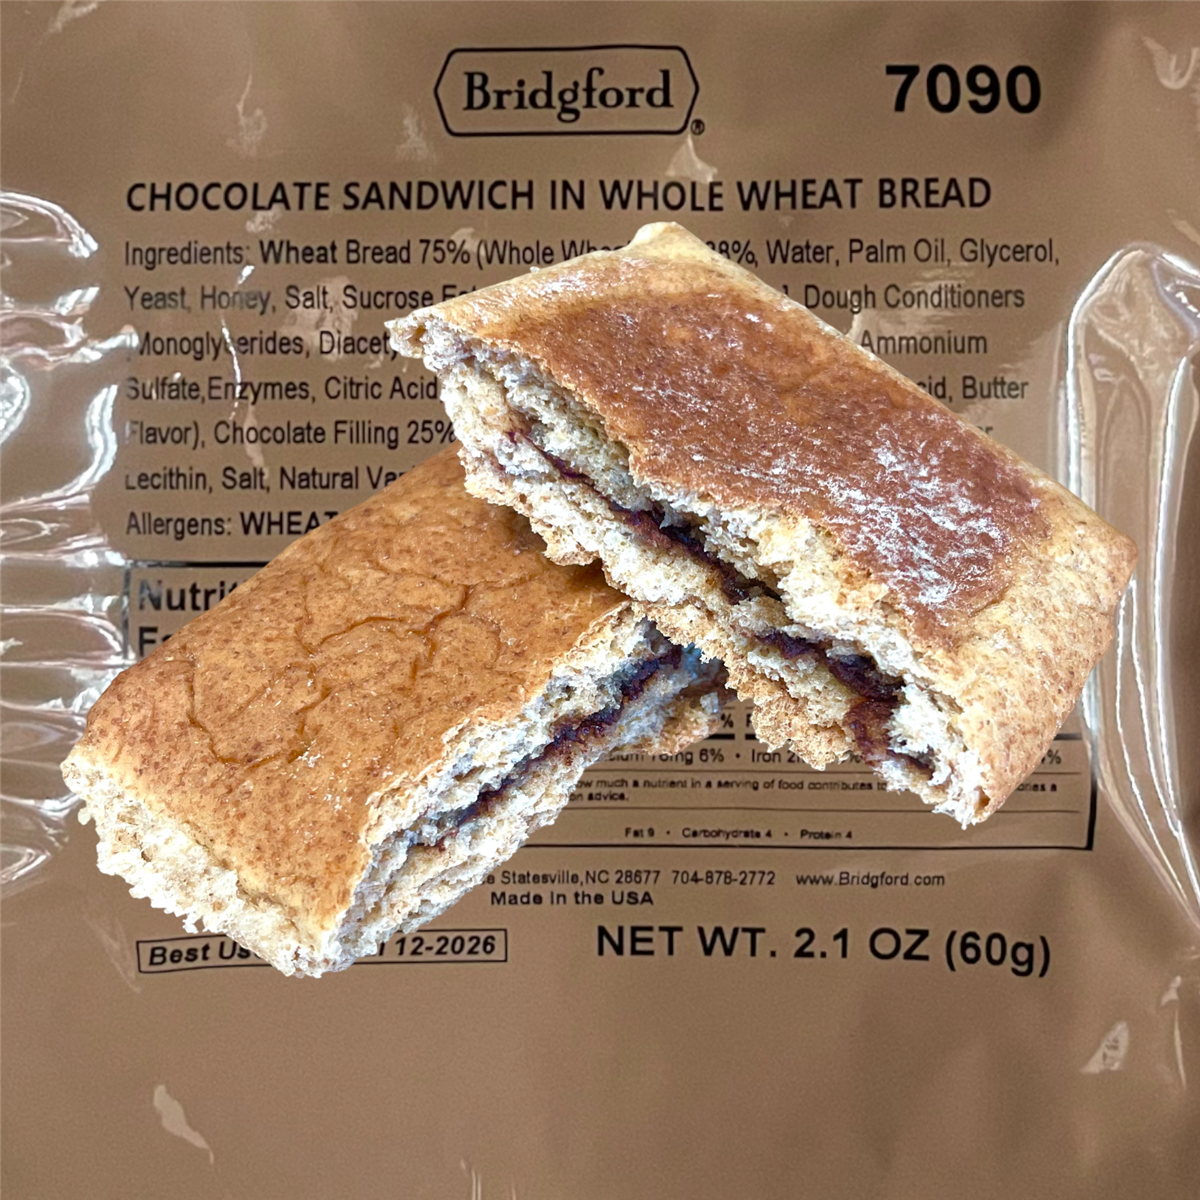 MRE Chocolate Sandwich in Whole Wheat Bread (Chocolate Turnover) by Bridgford